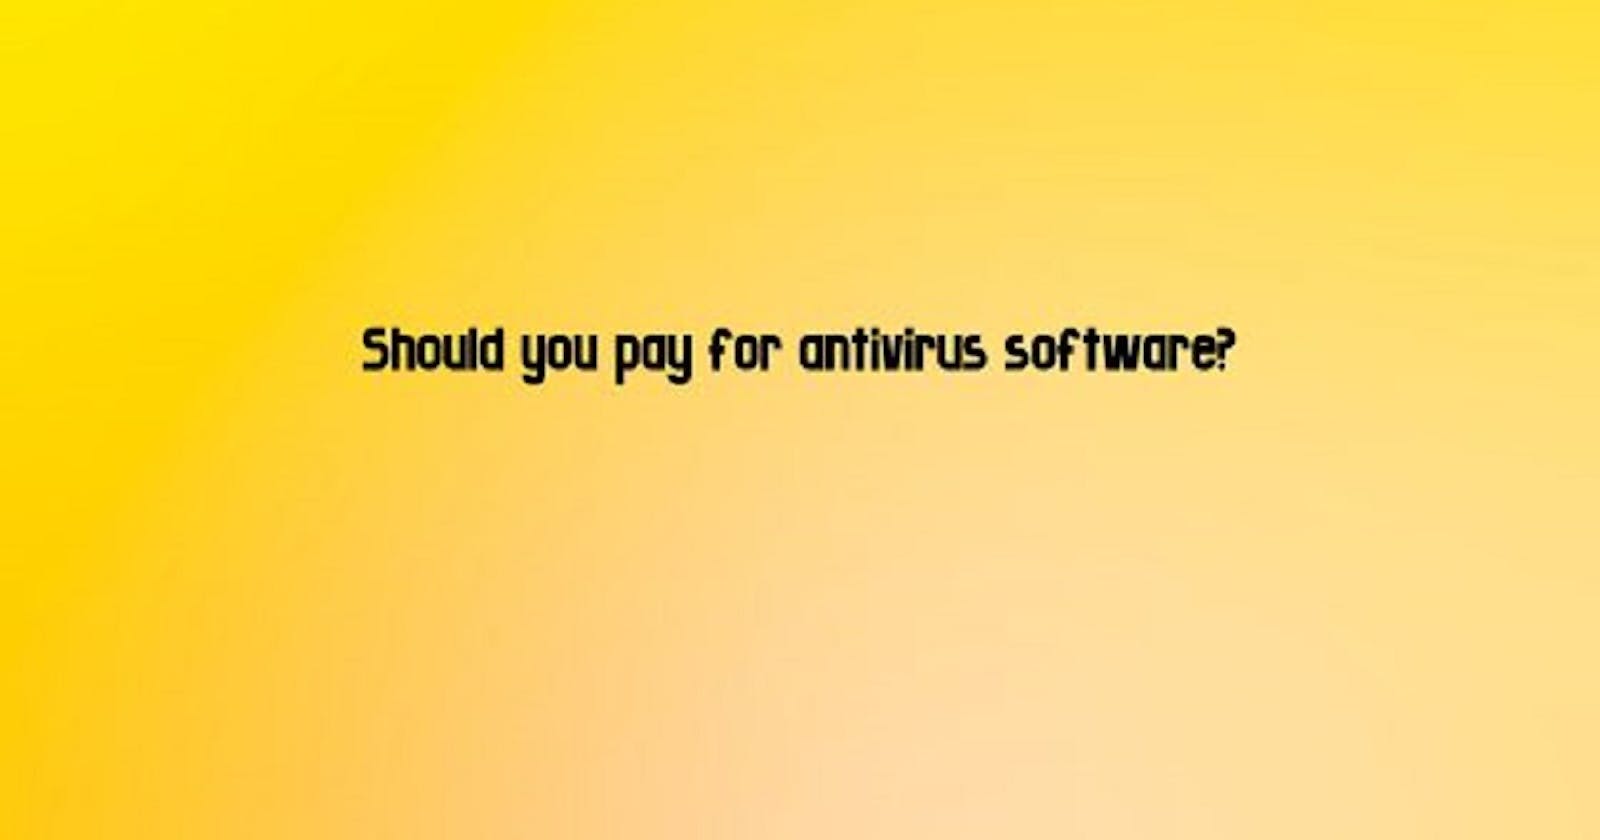 Should you pay for antivirus software?